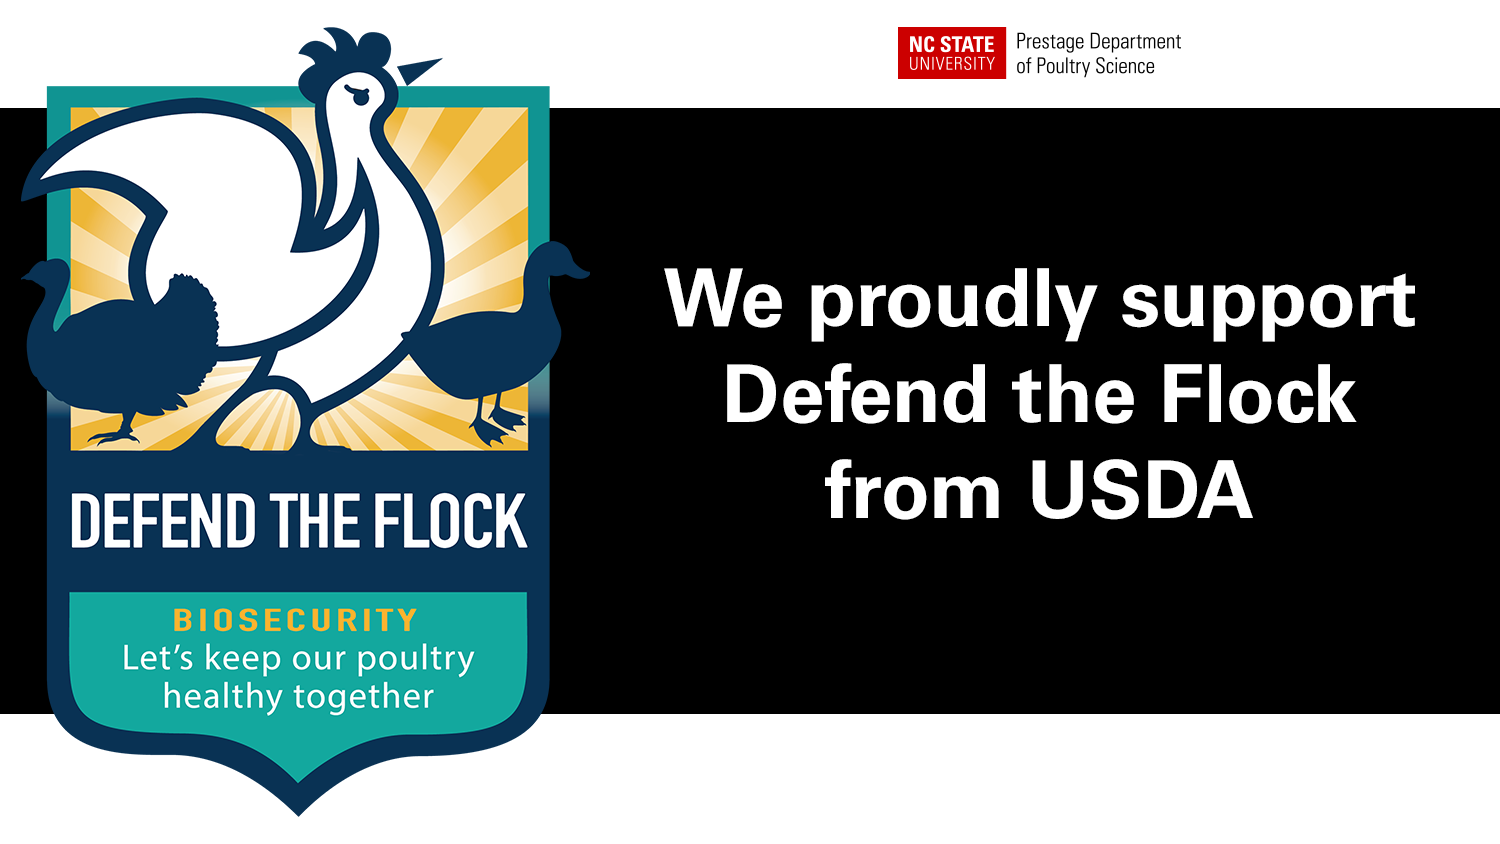 defend-the-flock-biosecurity-program-from-usda-nc-state-extension